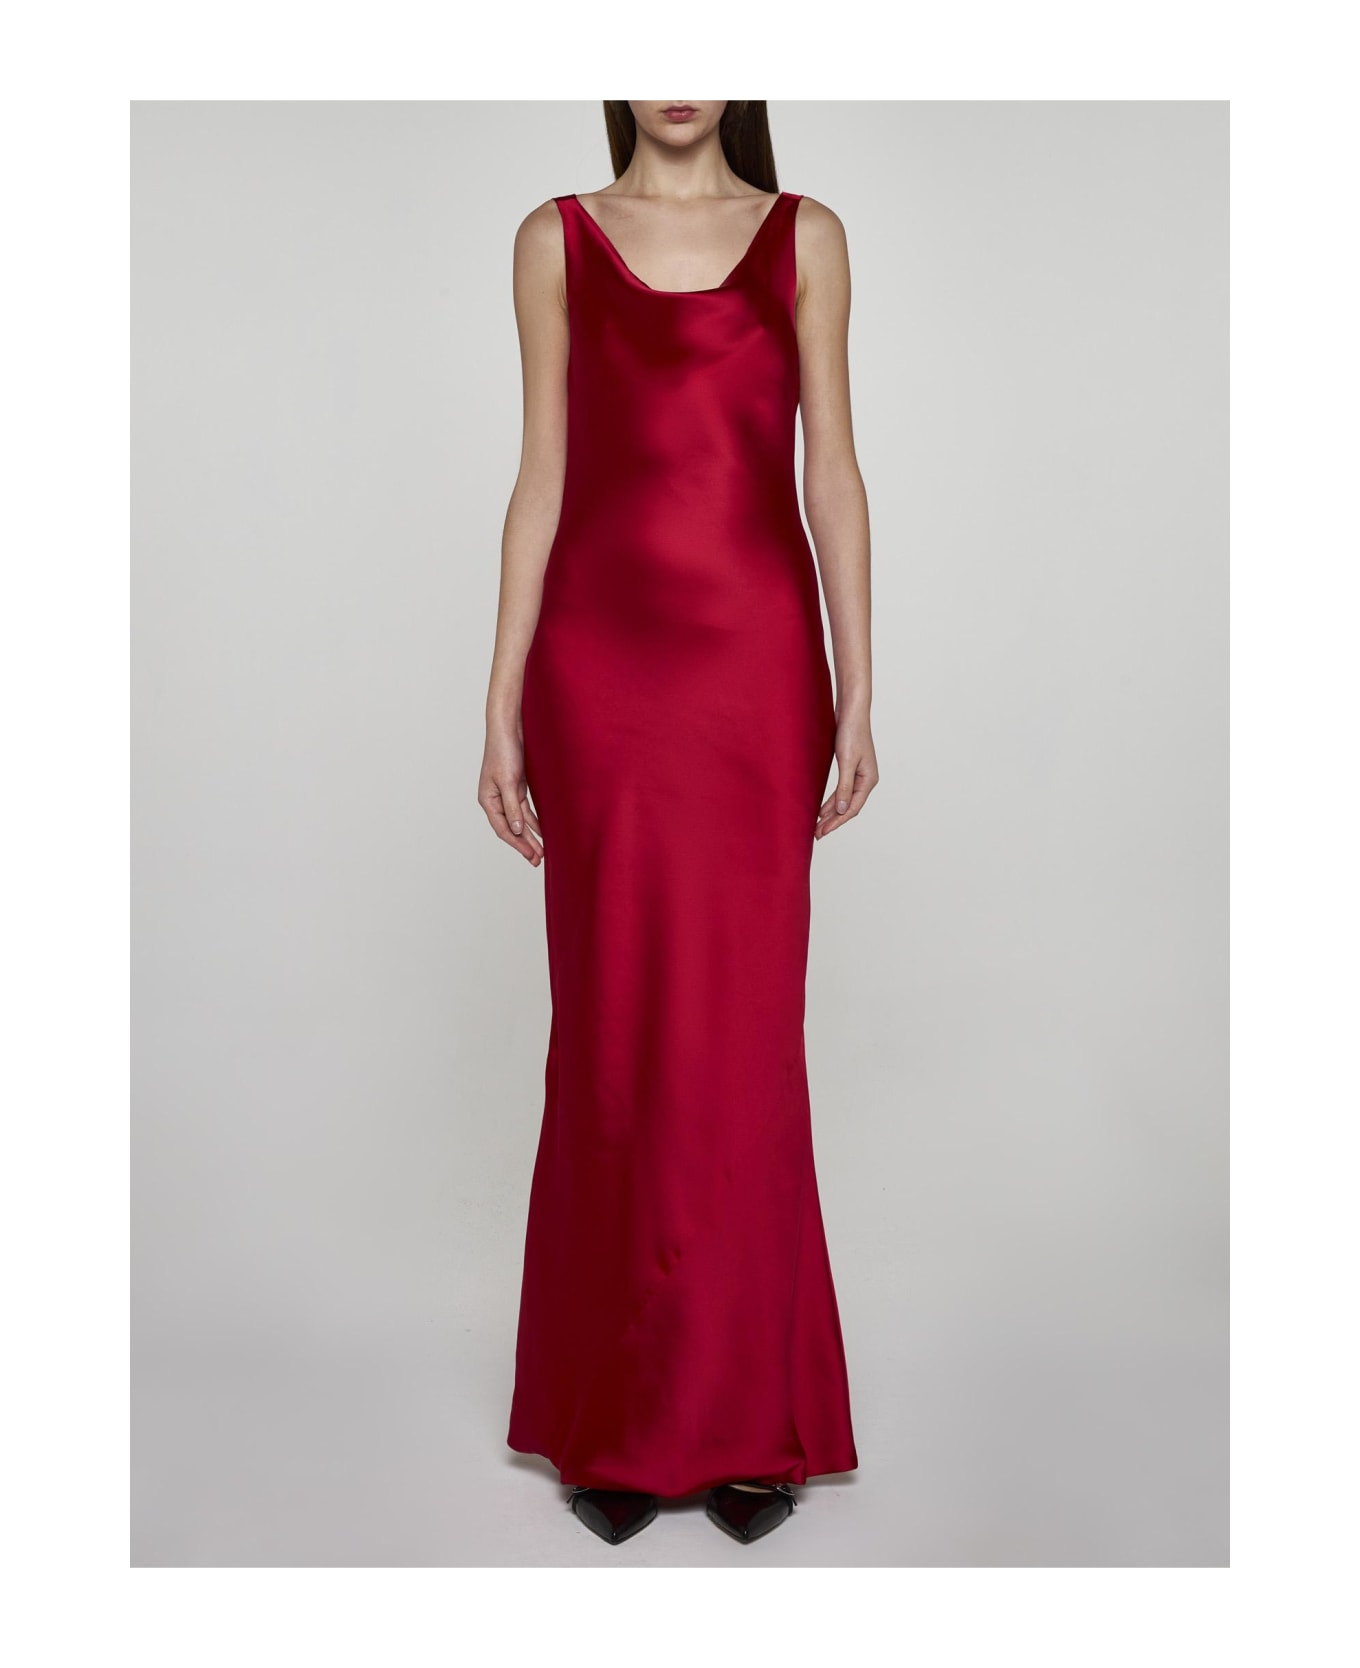 Norma Kamali Maria Satin Gown - TIGER RED